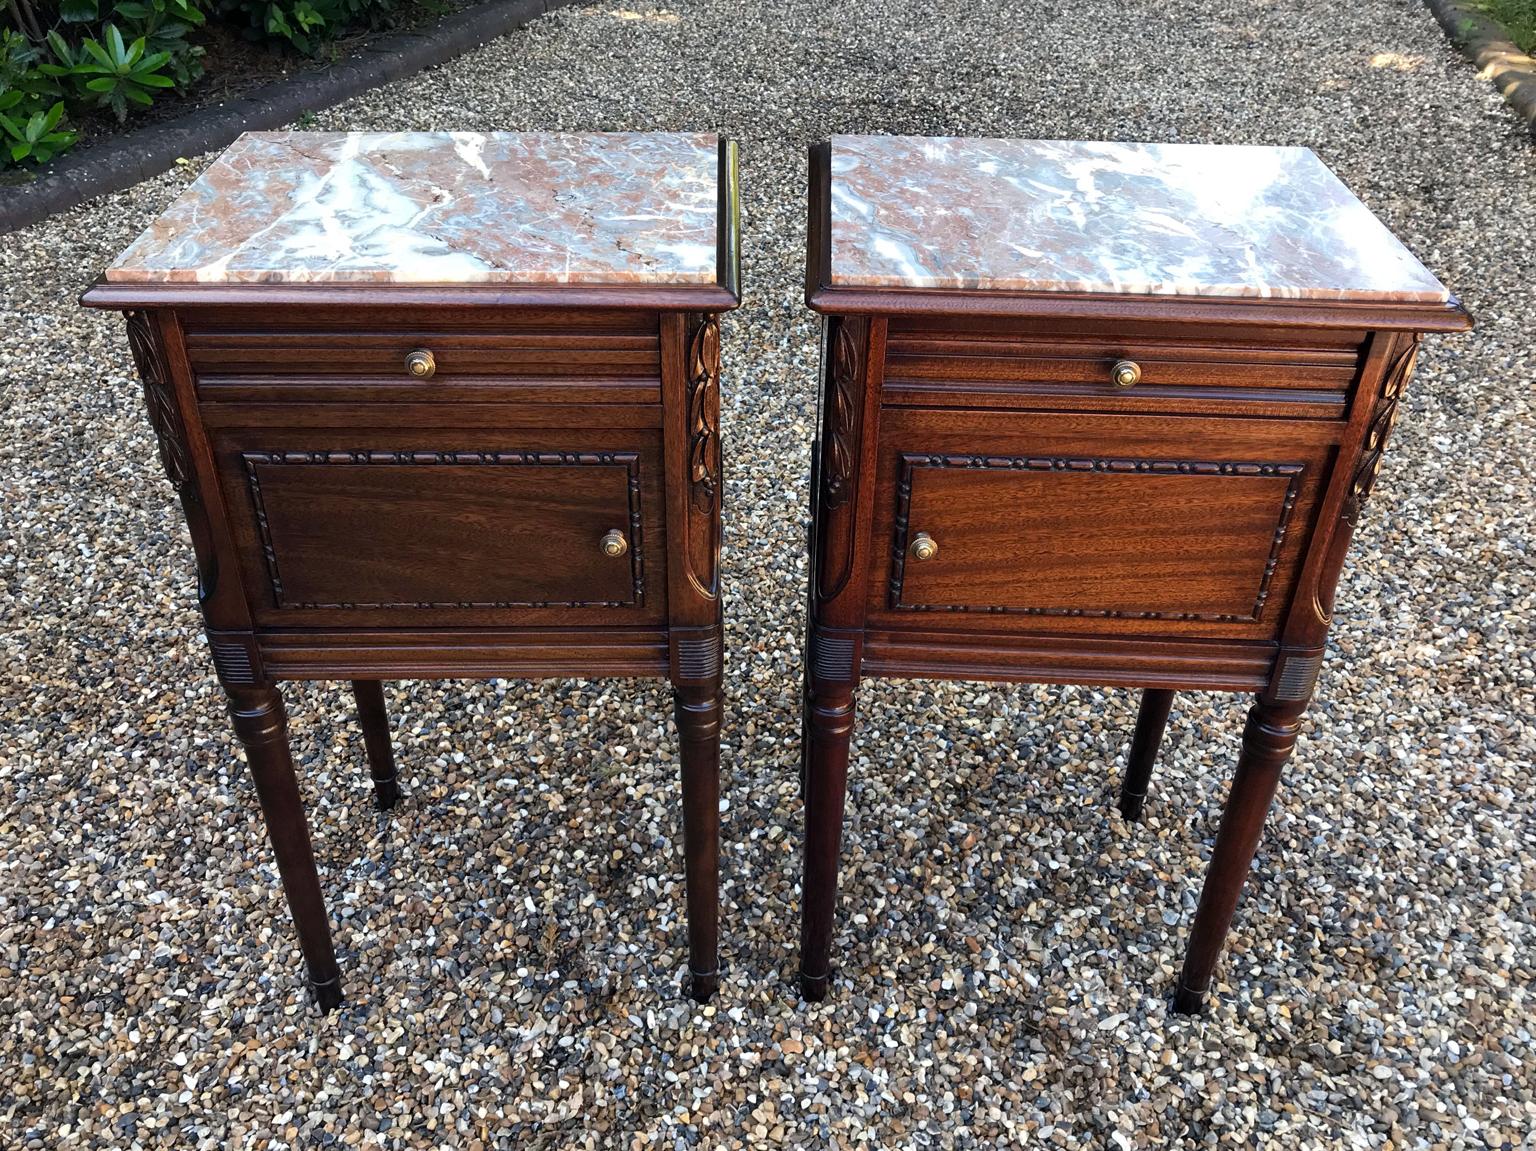 A pair of Edwardian French mahogany bedside tables each inset with marble tops, above a fitted drawer and door, raised on turned legs,

circa 1901-1910

Dimensions:
Height 33 inches – 83 cms
Width 18.5 inches – 47 cms
Depth 14.5 inches – 37